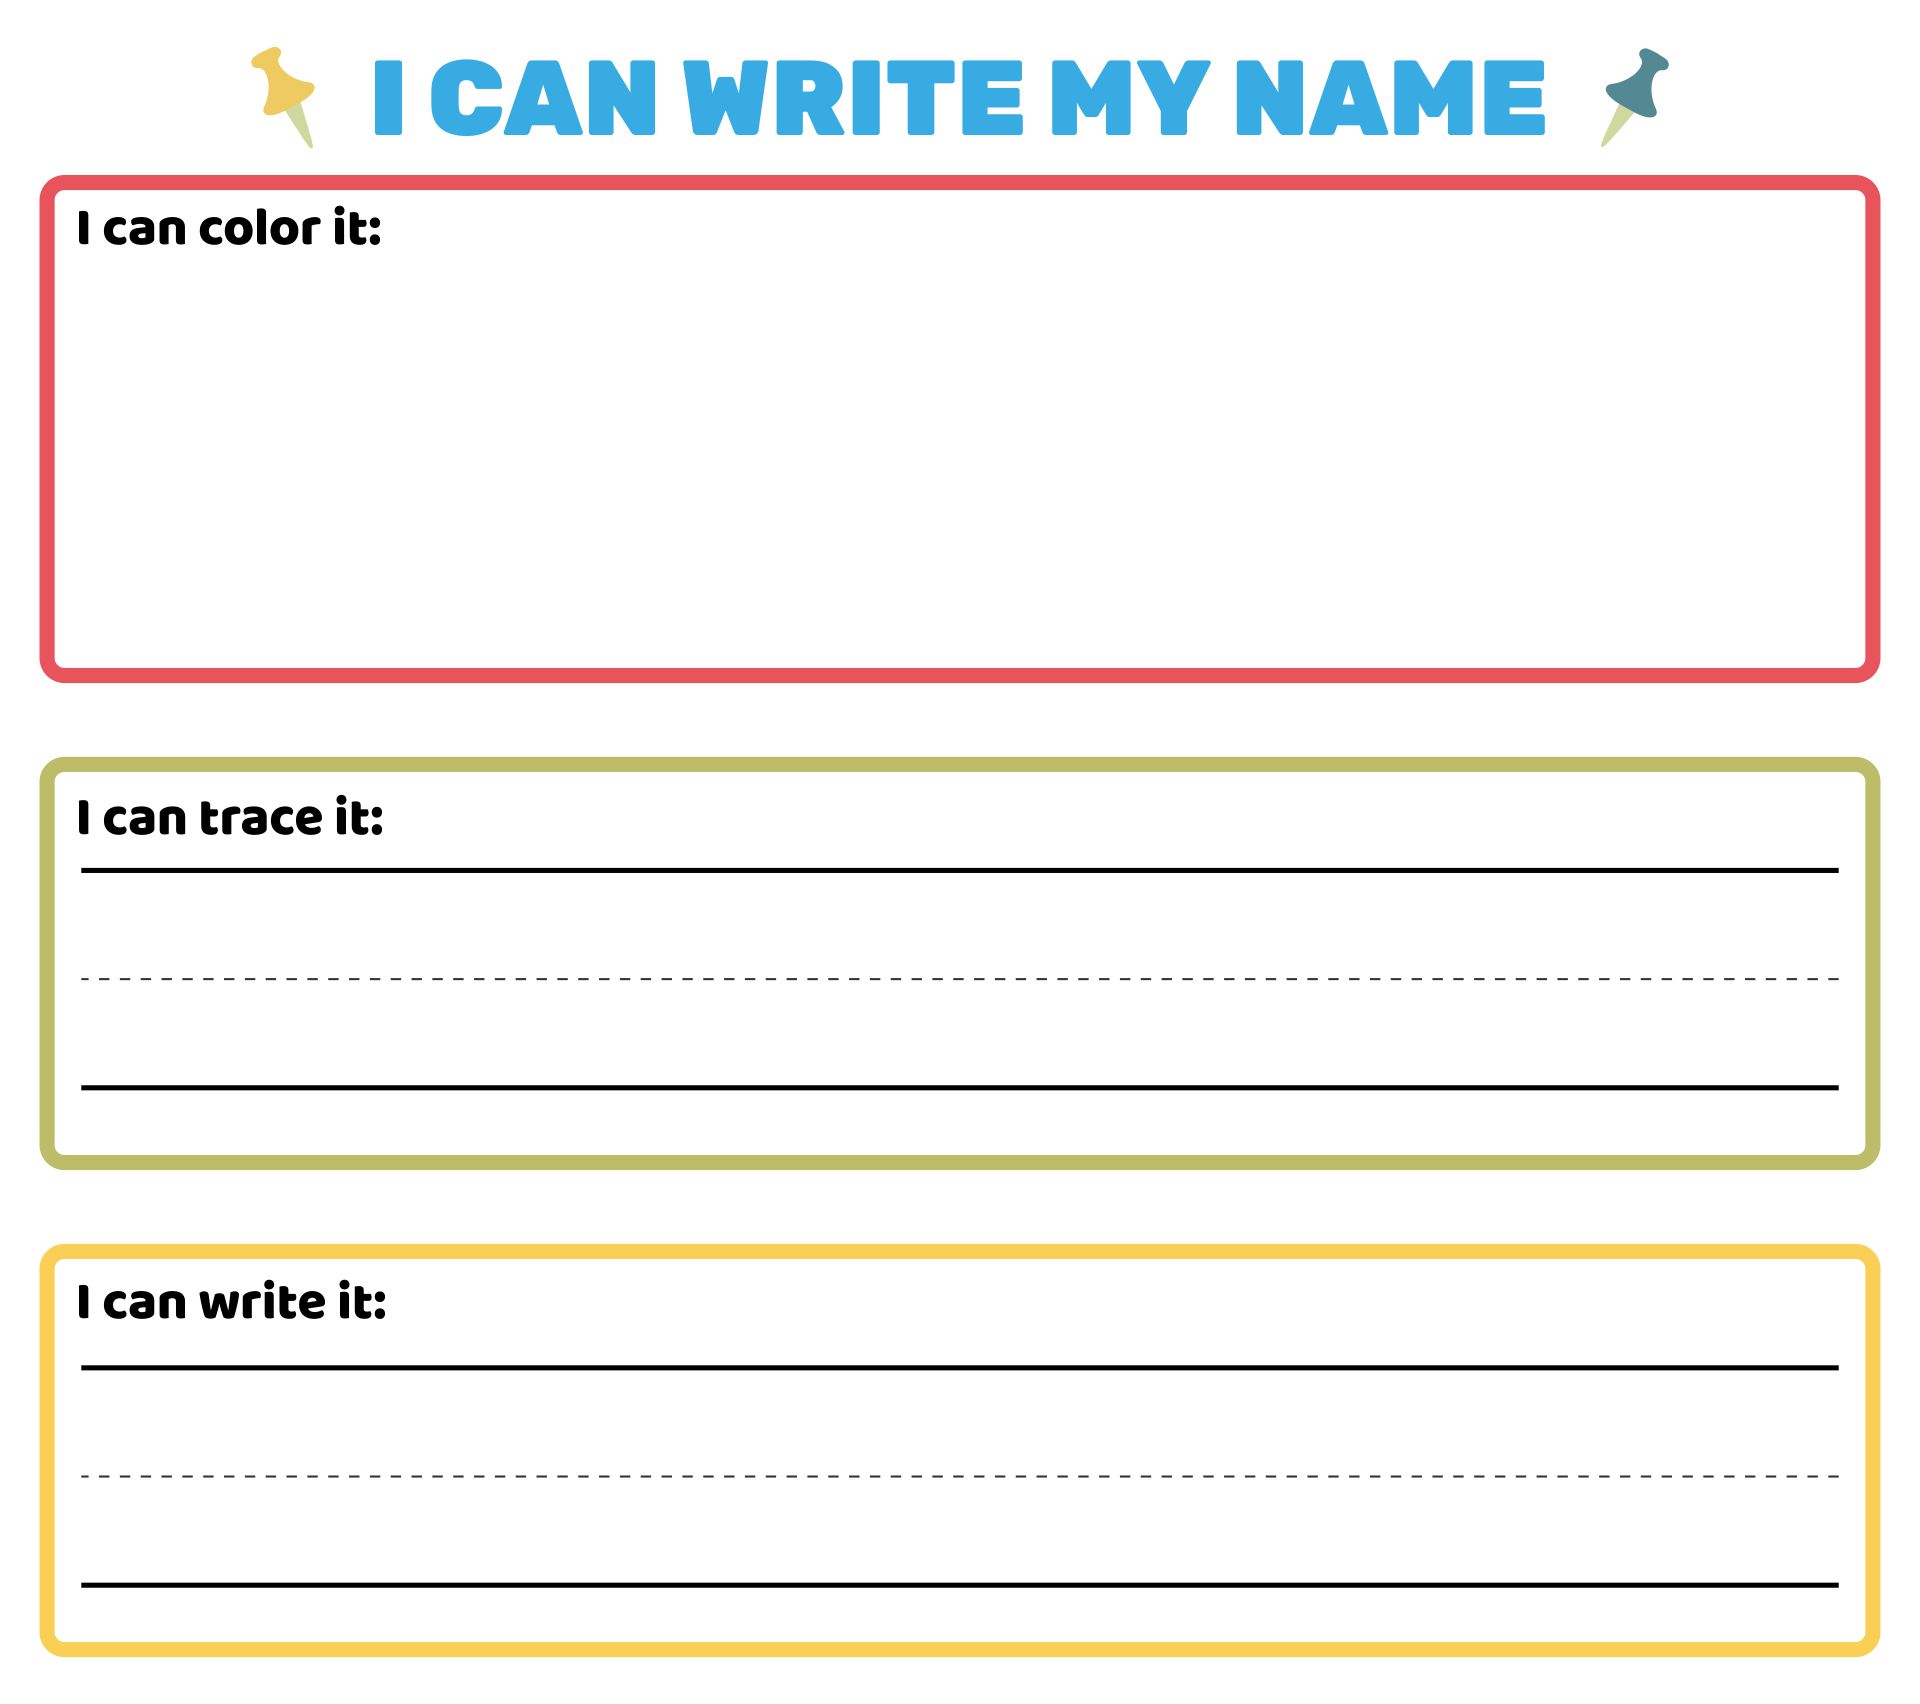 7-best-images-of-trace-my-name-worksheet-printable-write-your-name